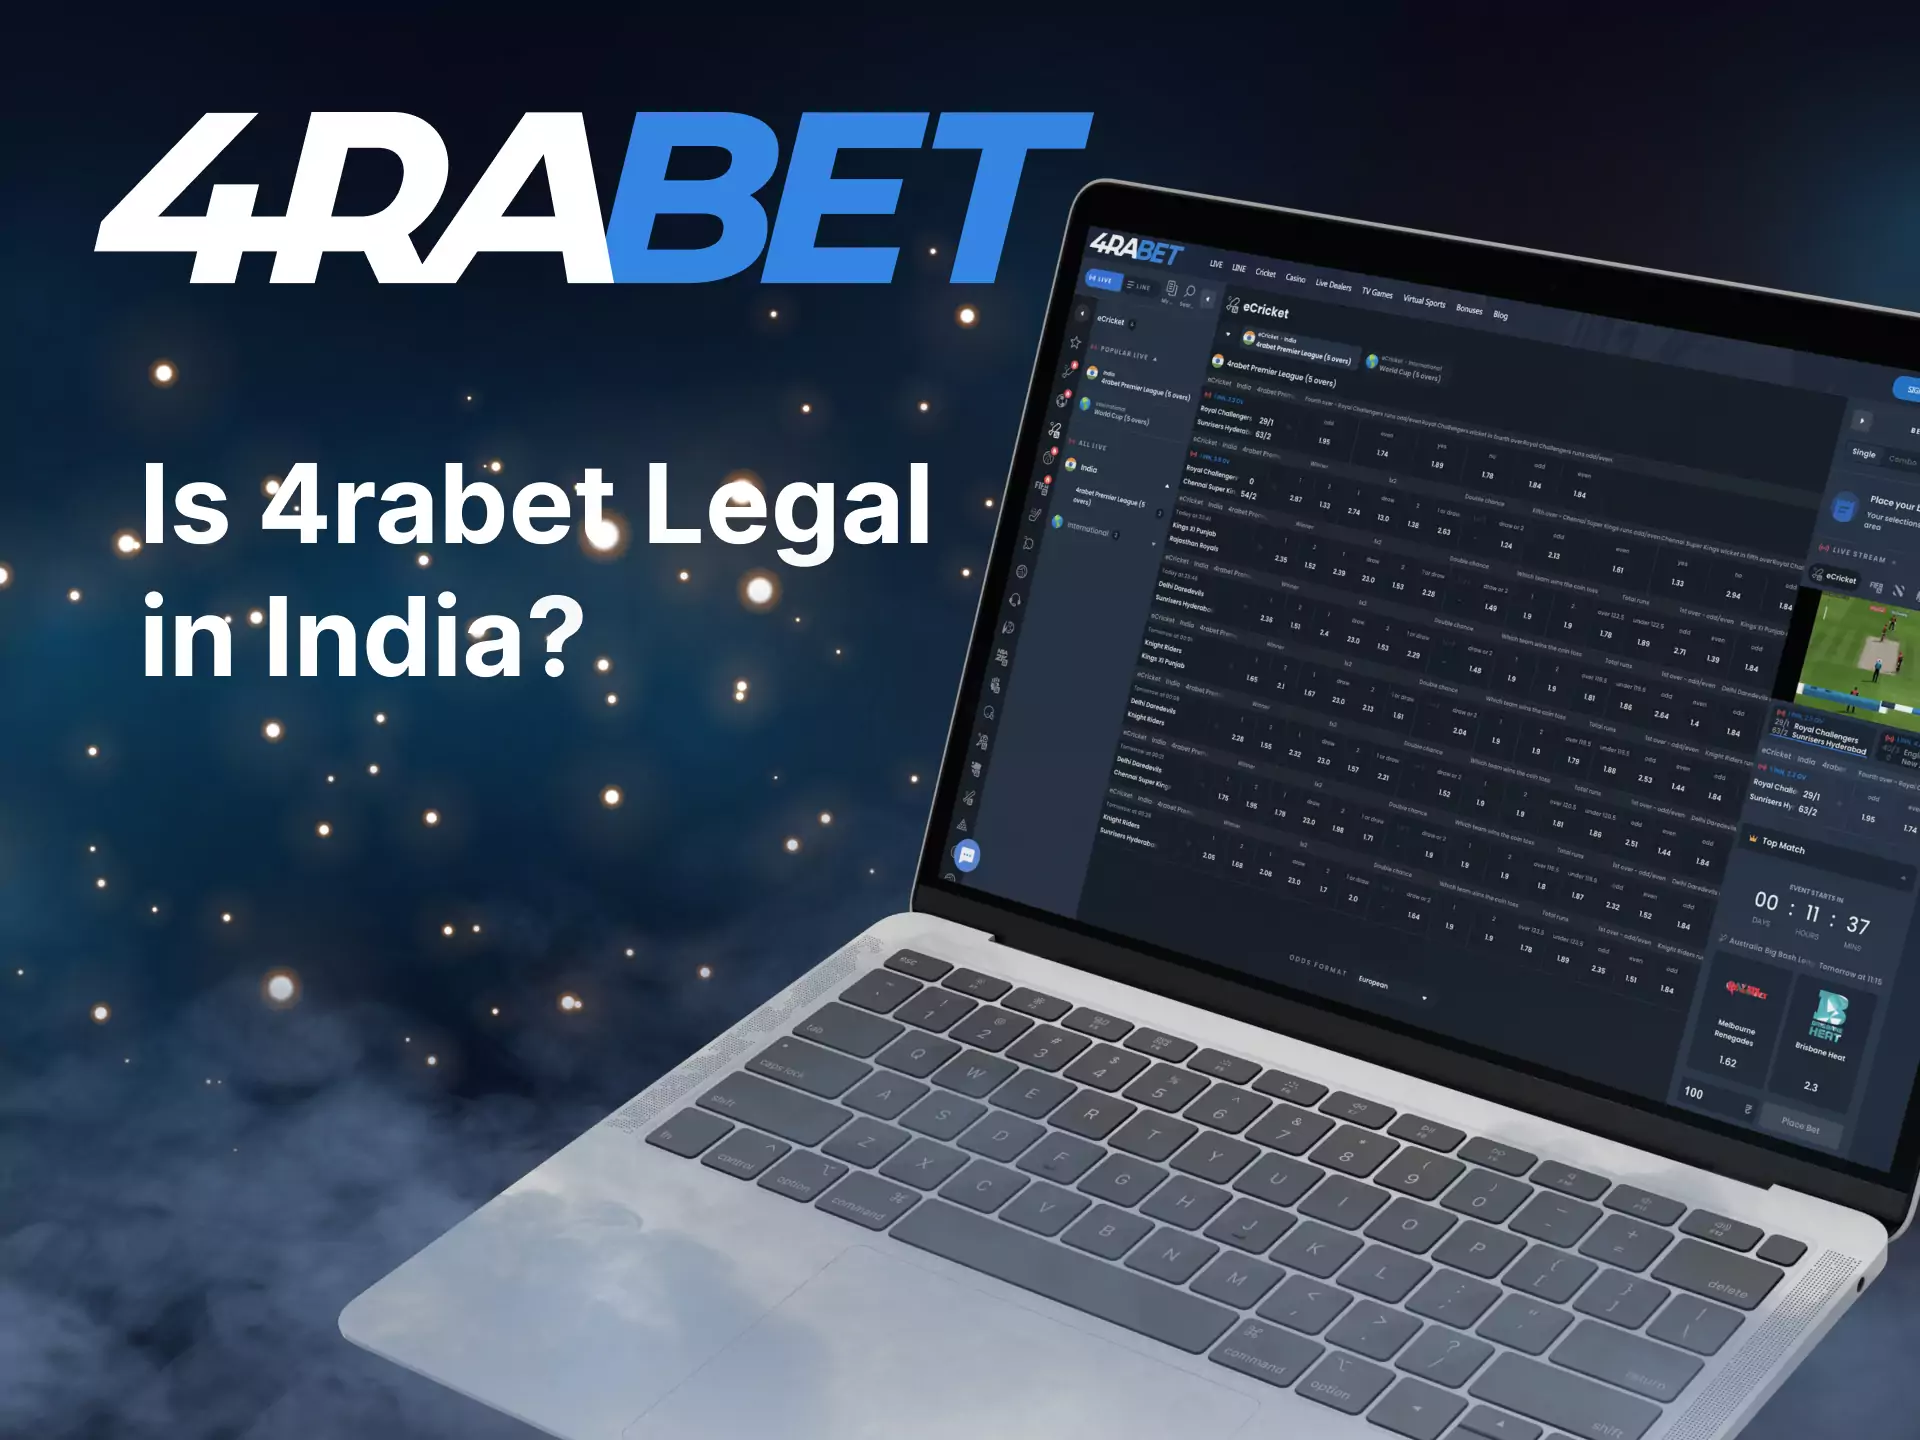 The 4rabet service is legal for players, you can play at the casino and bet on sports.